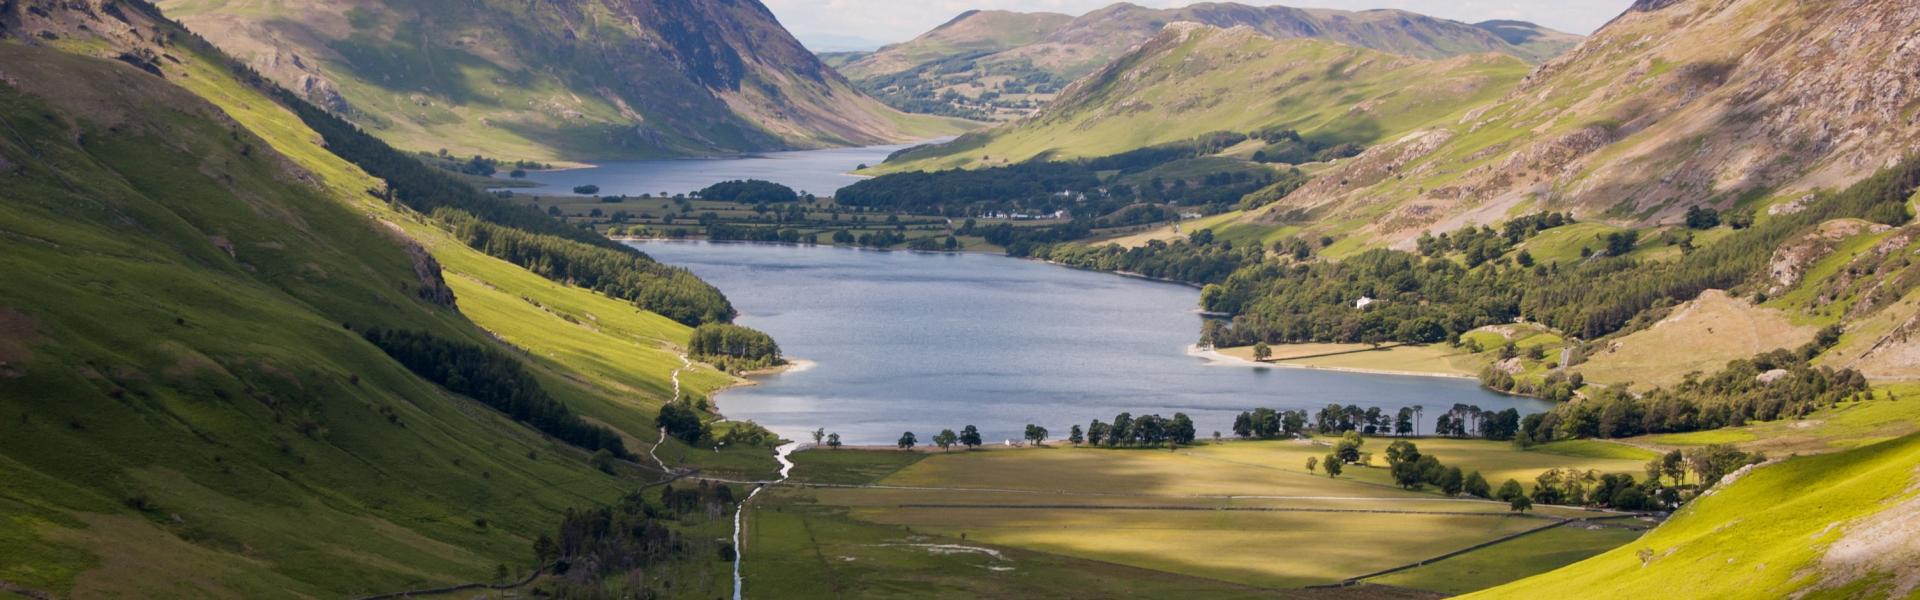 Holiday lettings & accommodation in Troutbeck - HomeToGo